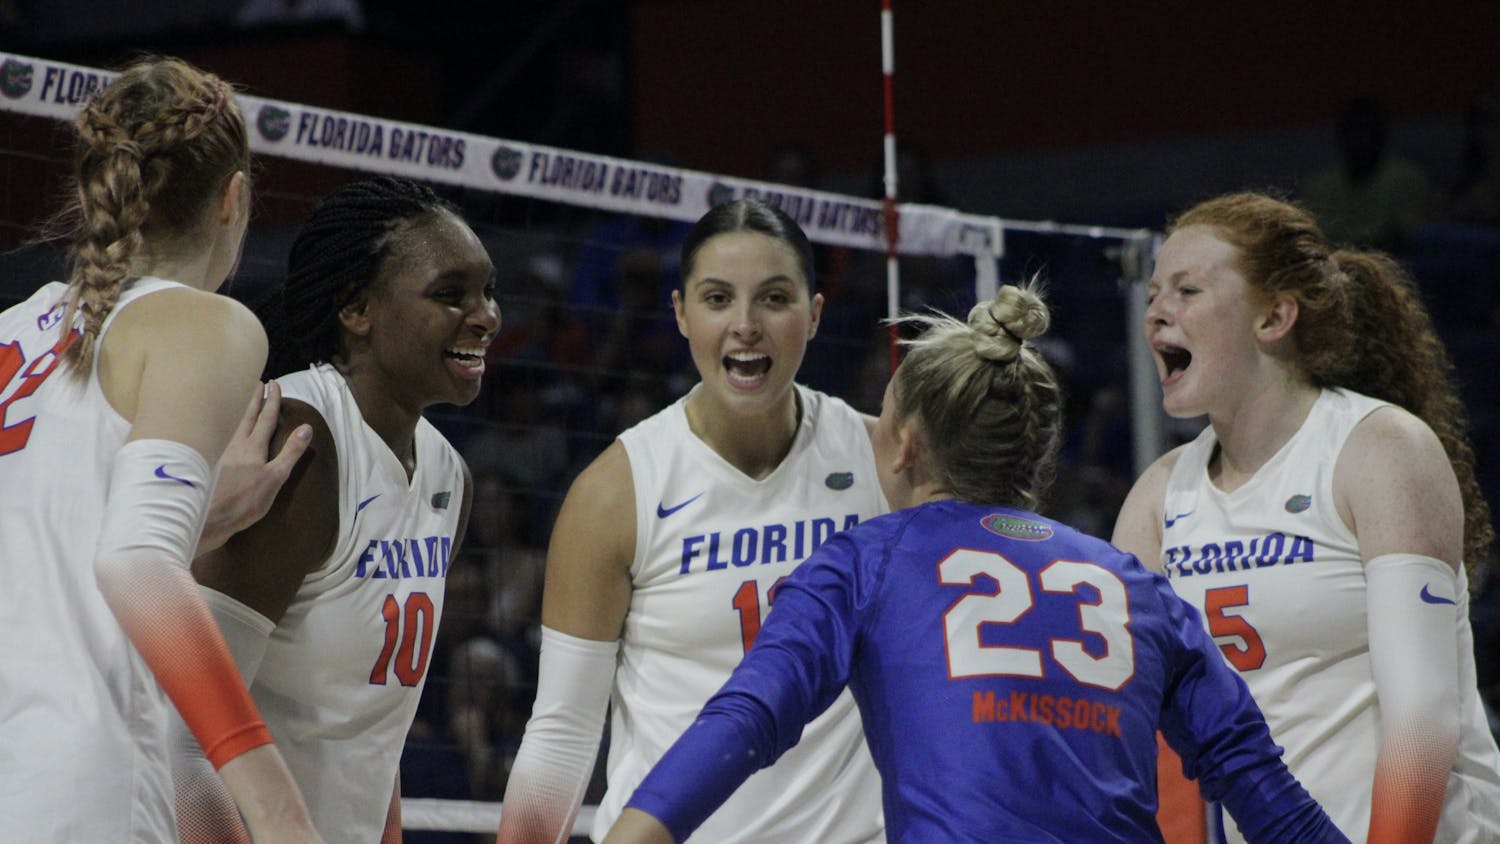 The Florida volleyball team celebrates during a match against the Virginia Cavaliers Aug. 27, 2021.